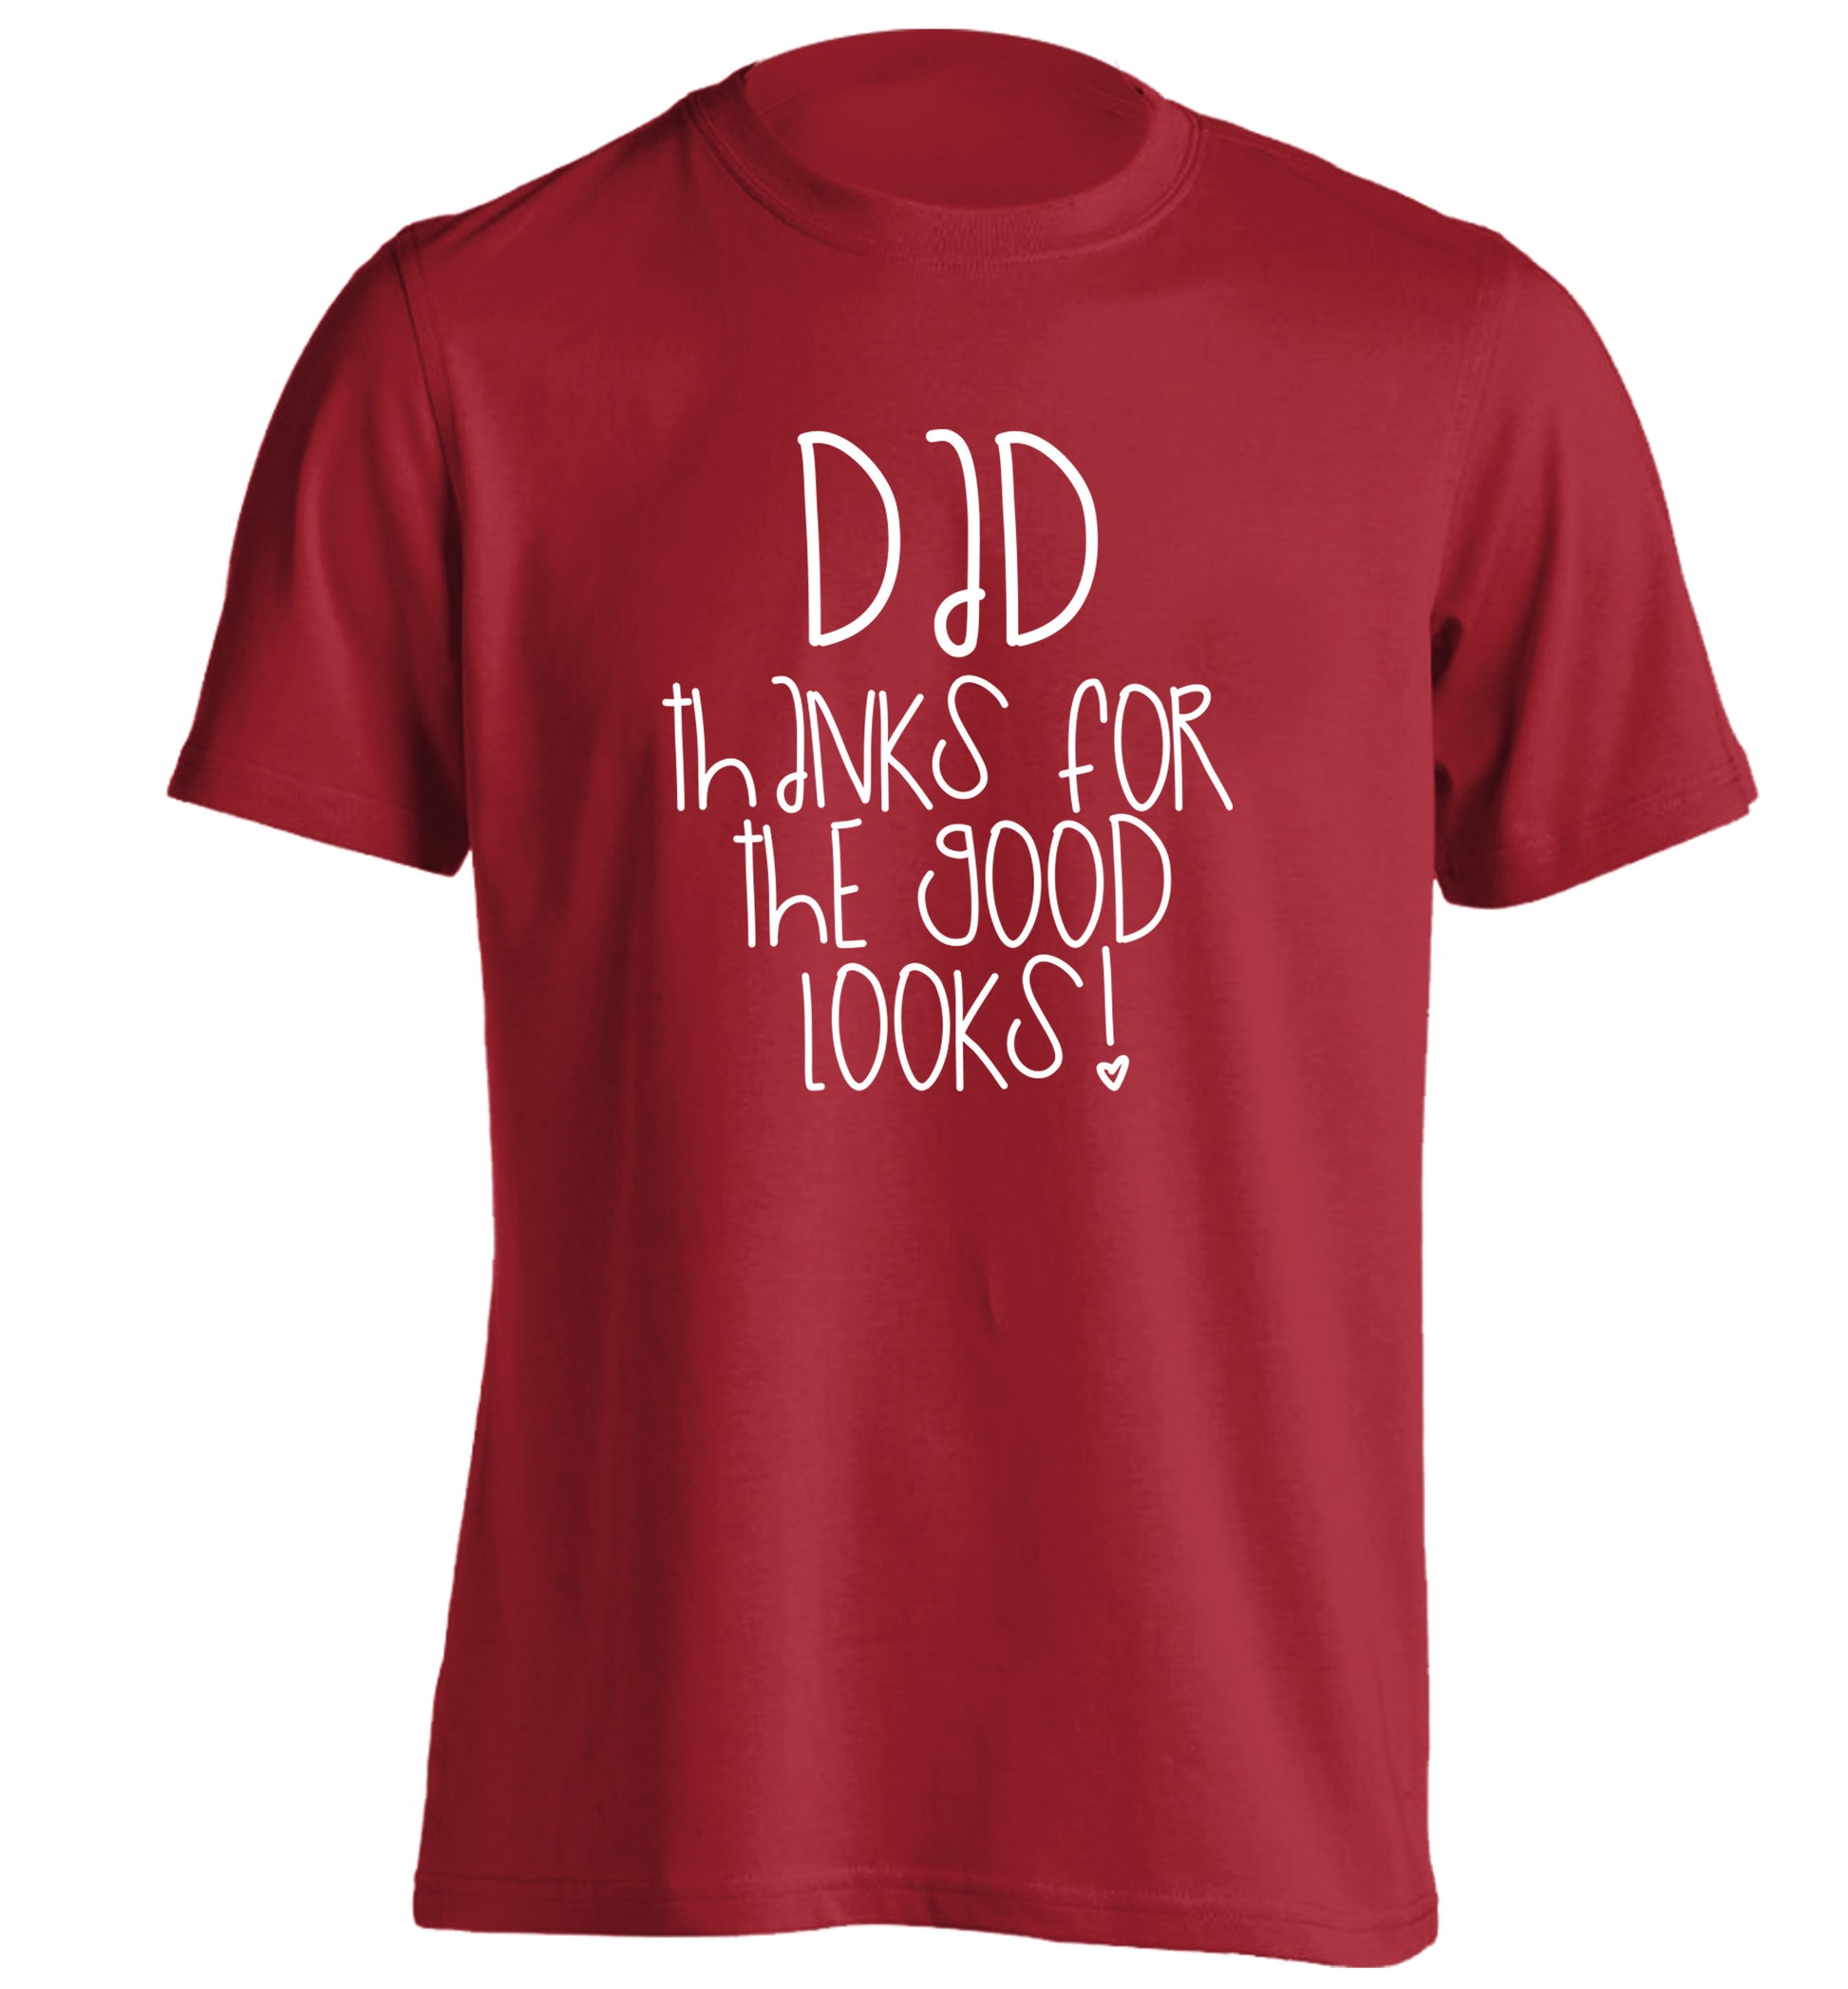 Dad thanks for the good looks adults unisex red Tshirt 2XL